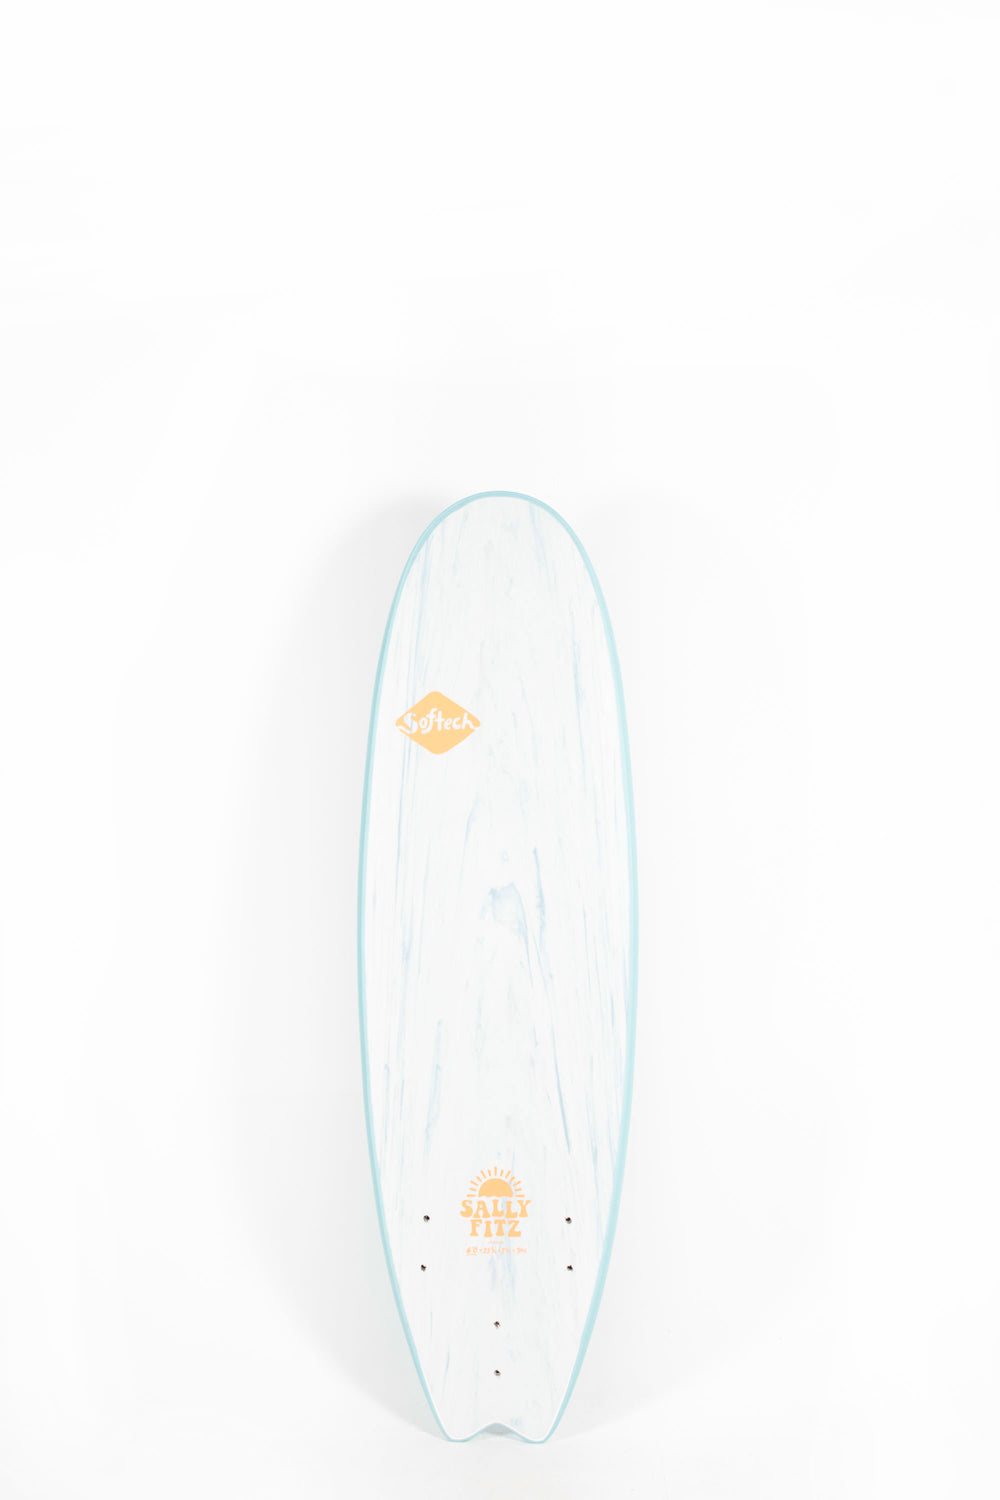 SOFTECH - HANDSHAPED SALLY FITZGIBBONS 6'0